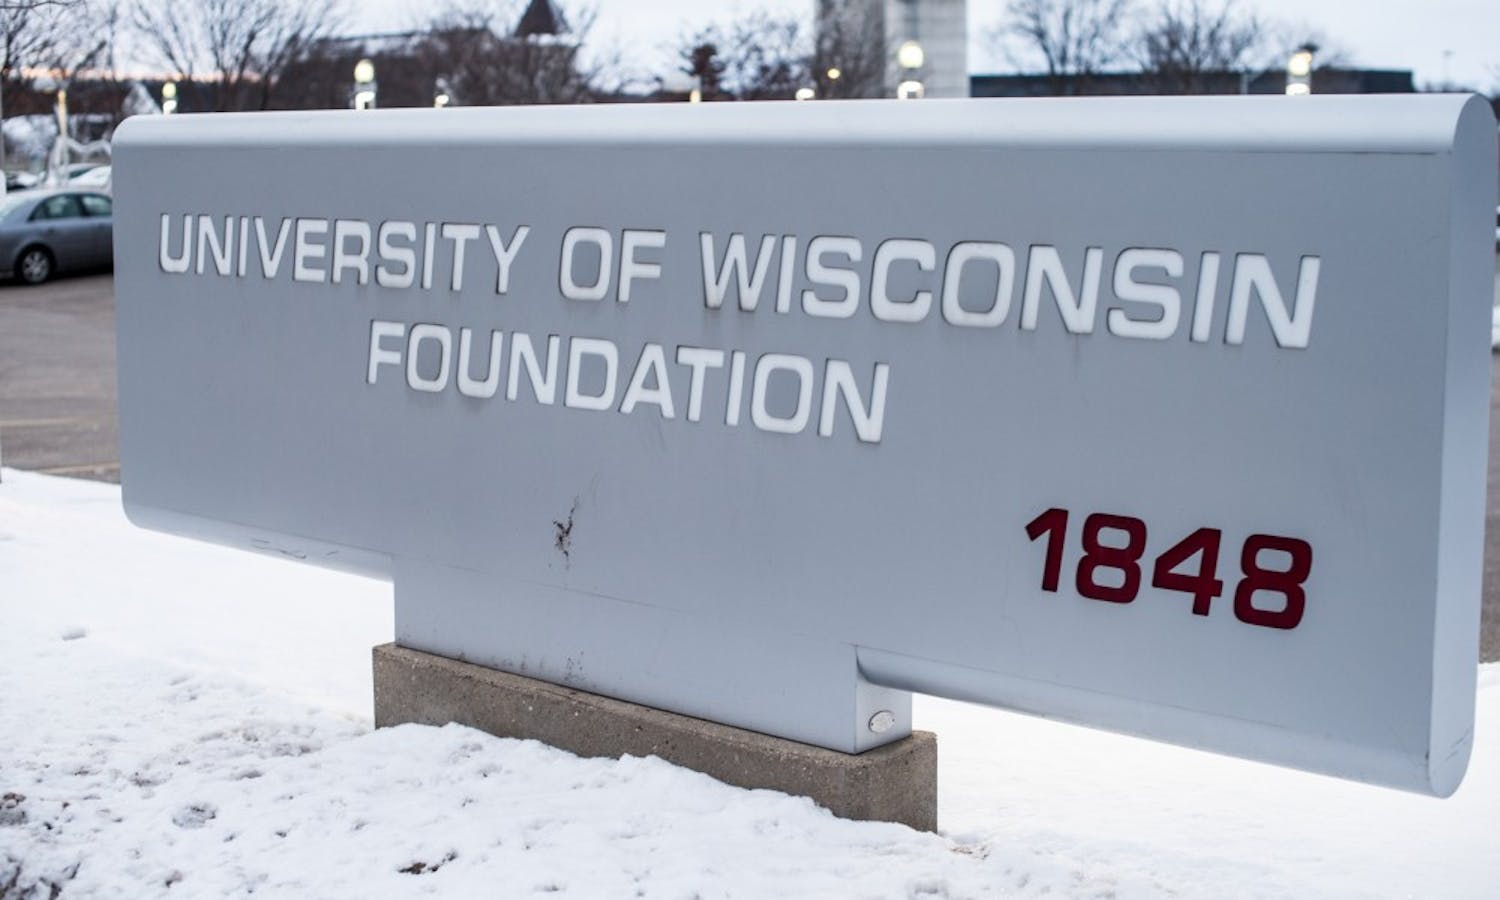 University of Wisconsin Foundation sign photographed in March 2017.